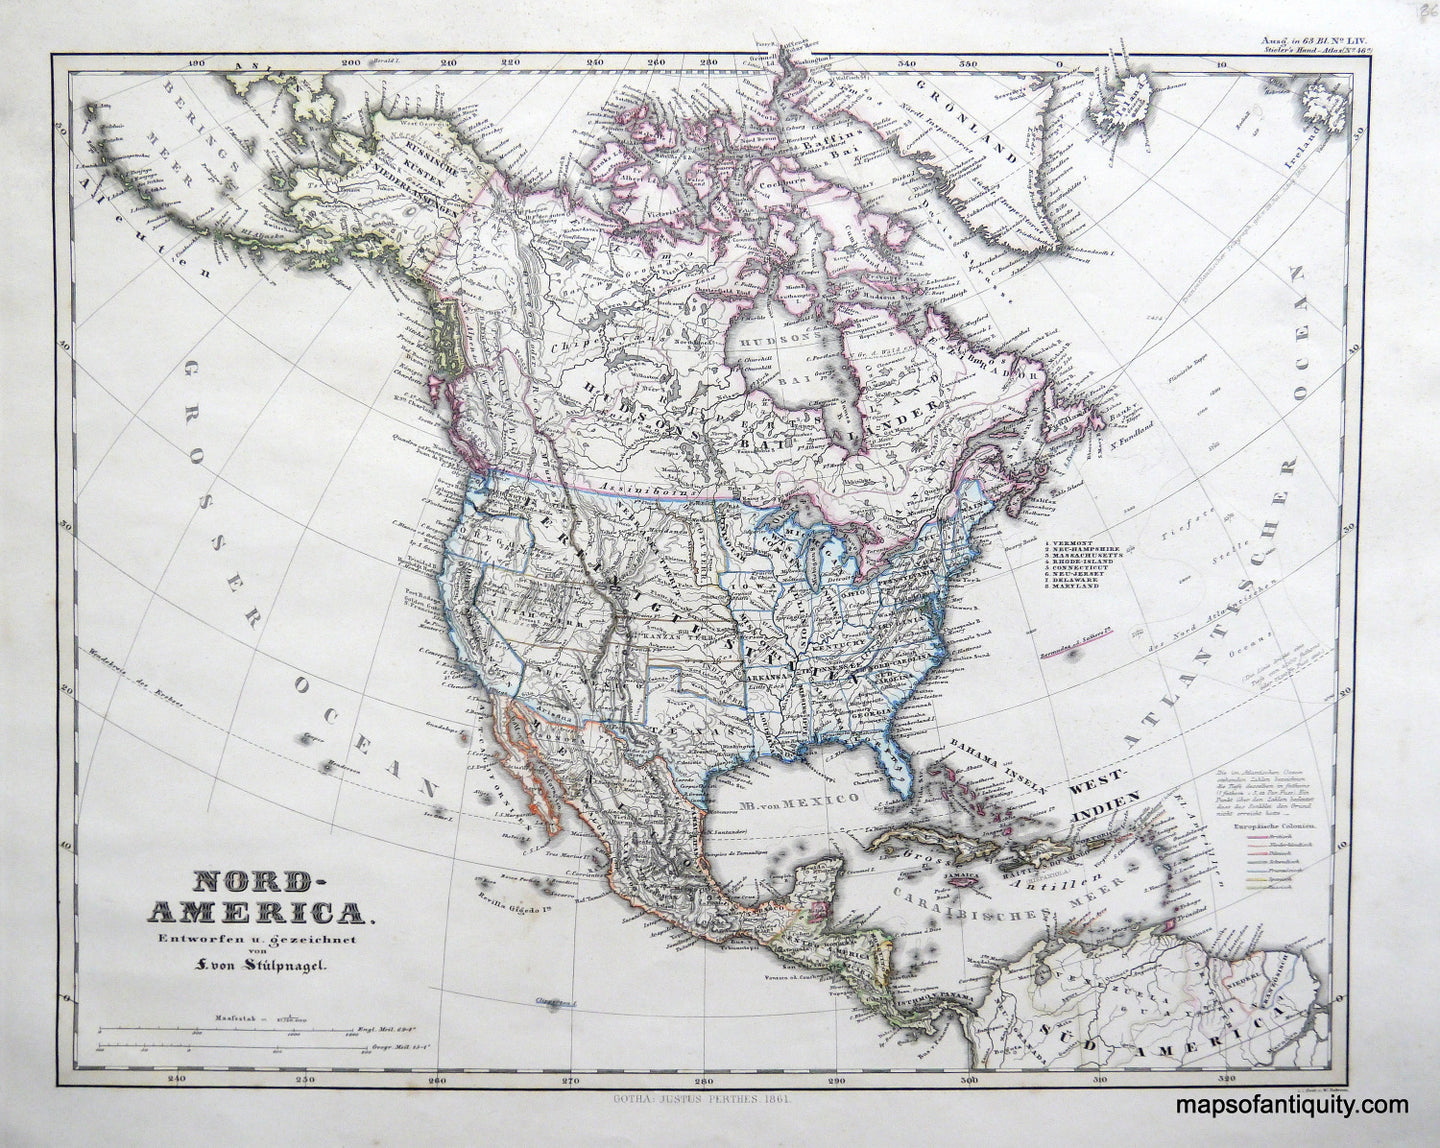 Antique-Hand-Colored-Map-Nord-America-North-America-North-America-General-1861-von-Stulpnagel-Maps-Of-Antiquity